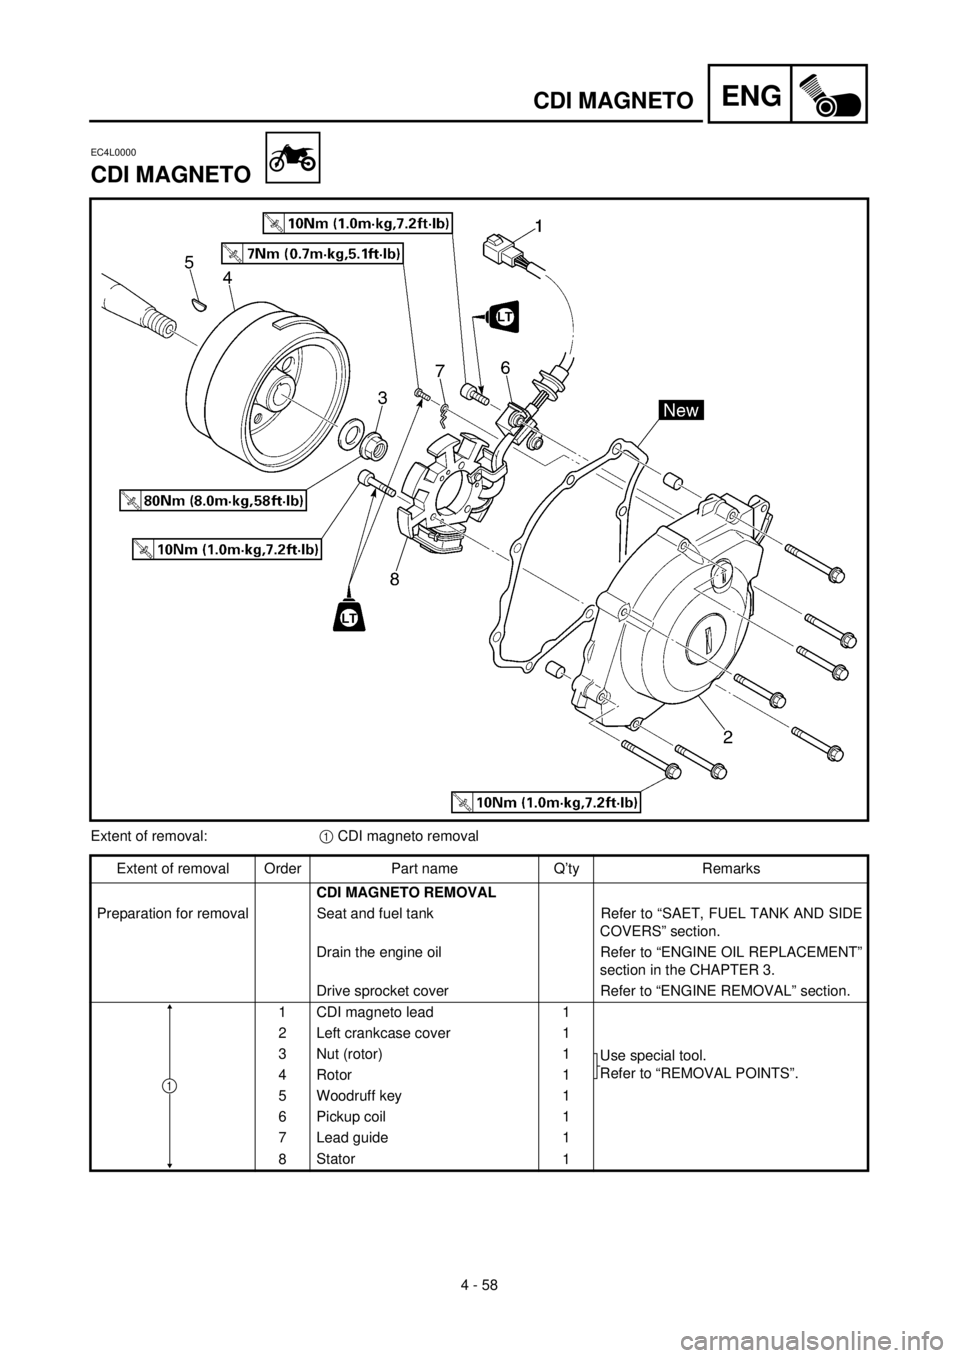 YAMAHA TTR125 2001  Owners Manual 4 - 58
ENGCDI MAGNETO
EC4L0000
CDI MAGNETO
Extent of removal:1 CDI magneto removal
Extent of removal Order Part name Q’ty Remarks
CDI MAGNETO REMOVAL 
Preparation for removal Seat and fuel tank Refe